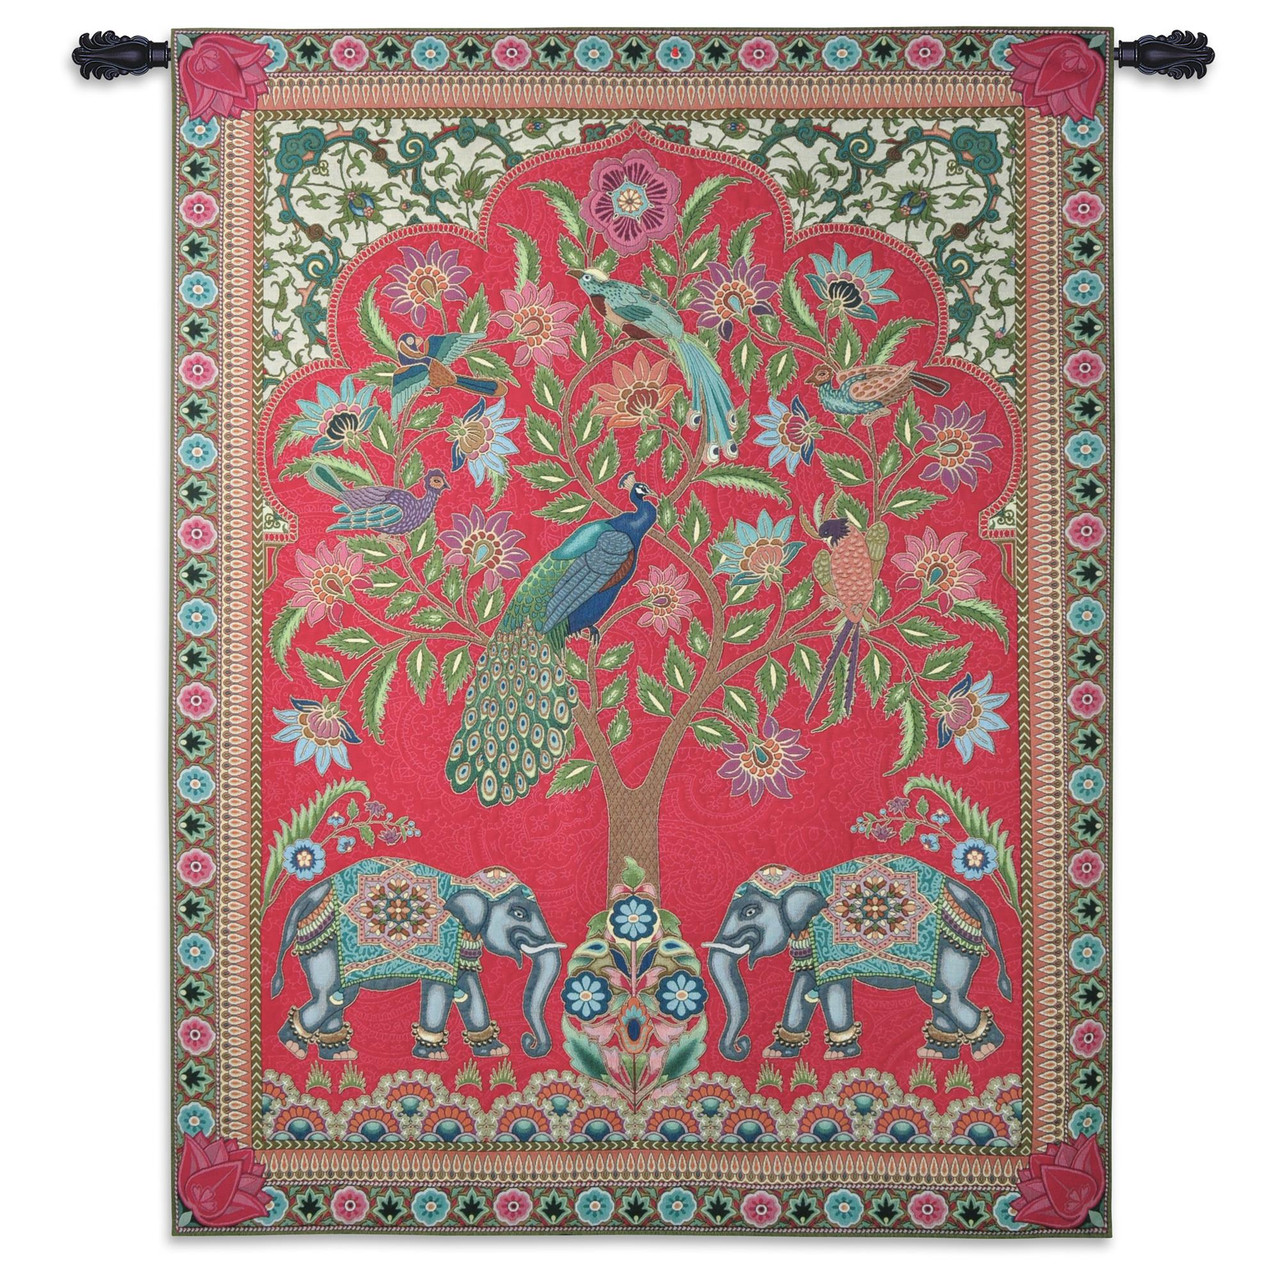 Asian Elephants, Woven Tapestry Wall Art Hanging, Jewel Tones with  Peacocks